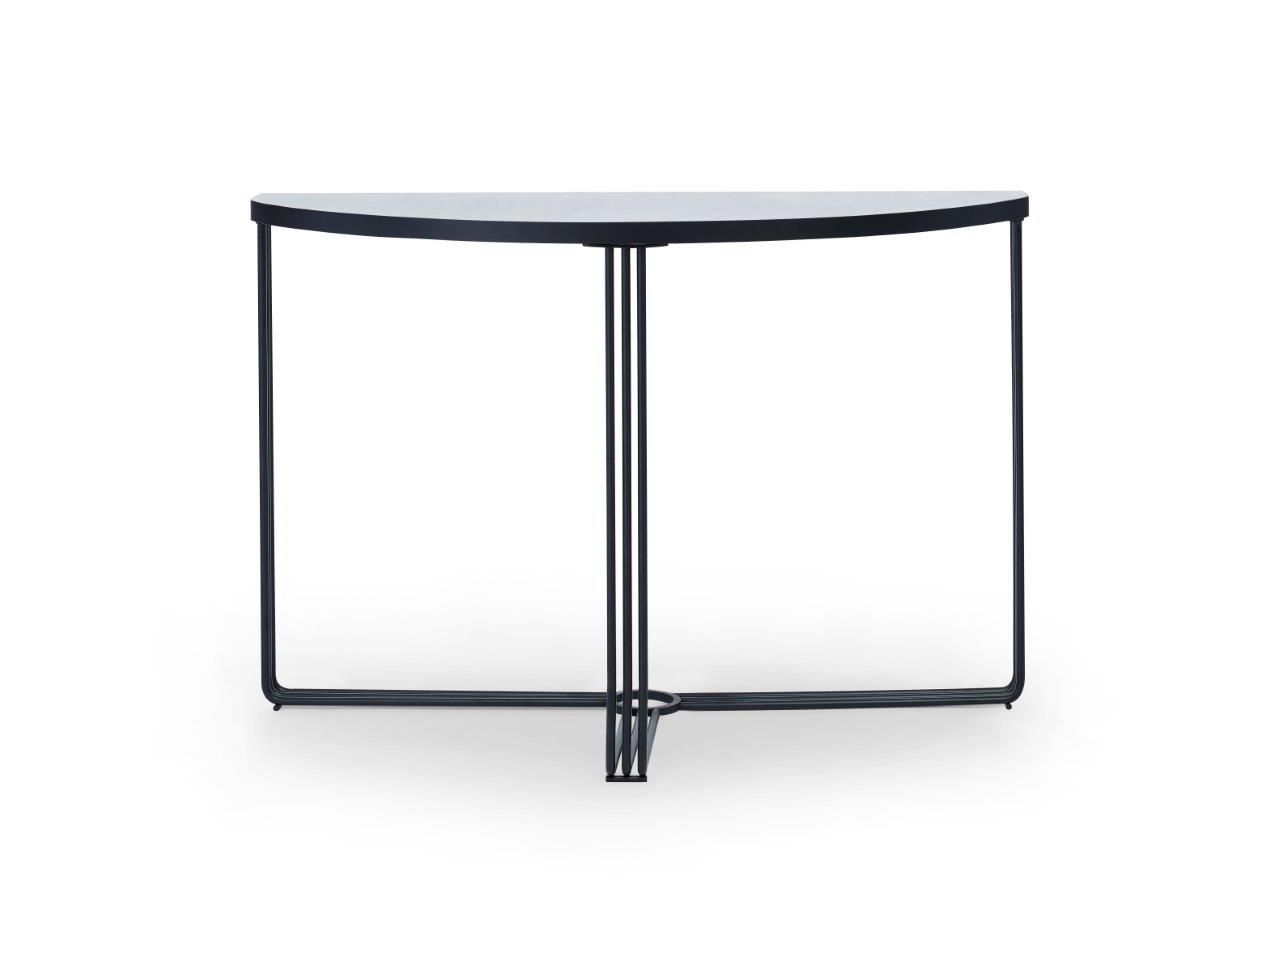 Gillmore Space Finn Collection Demi Lune Console Table with Matt Black Frame